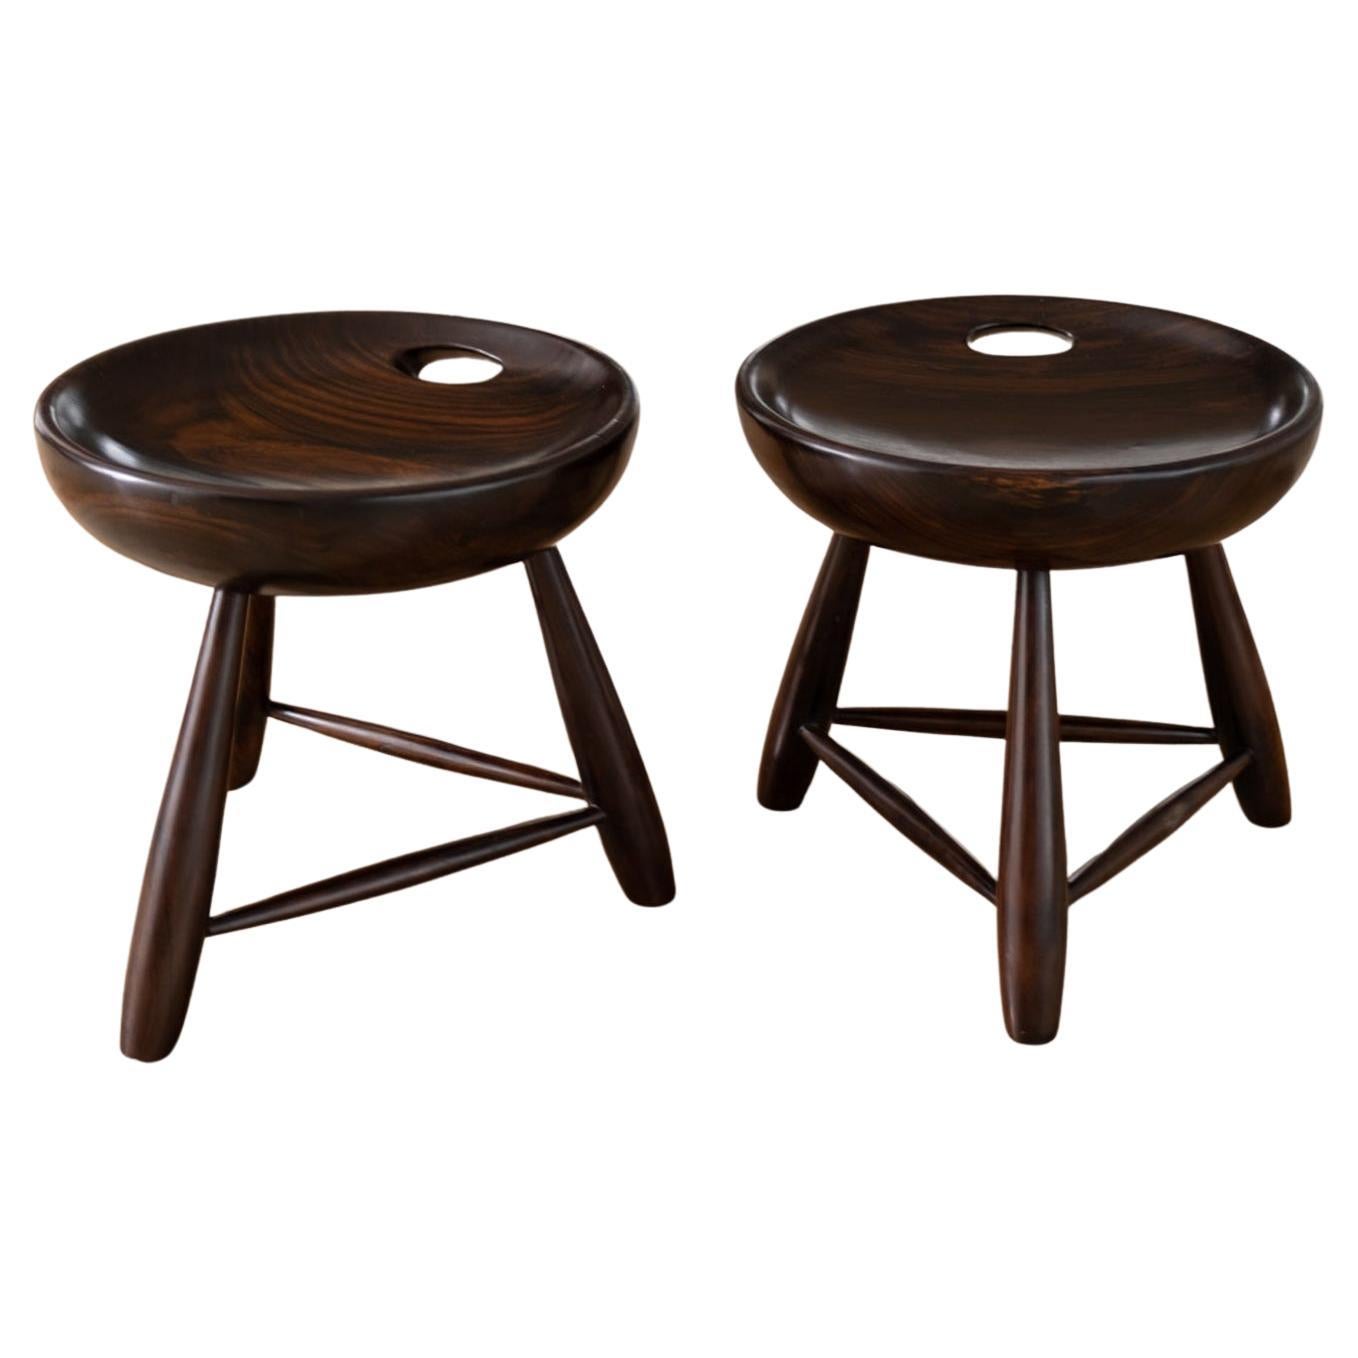 Pair of Mocho Stools by Sergio Rodrigues, Brazil 1958